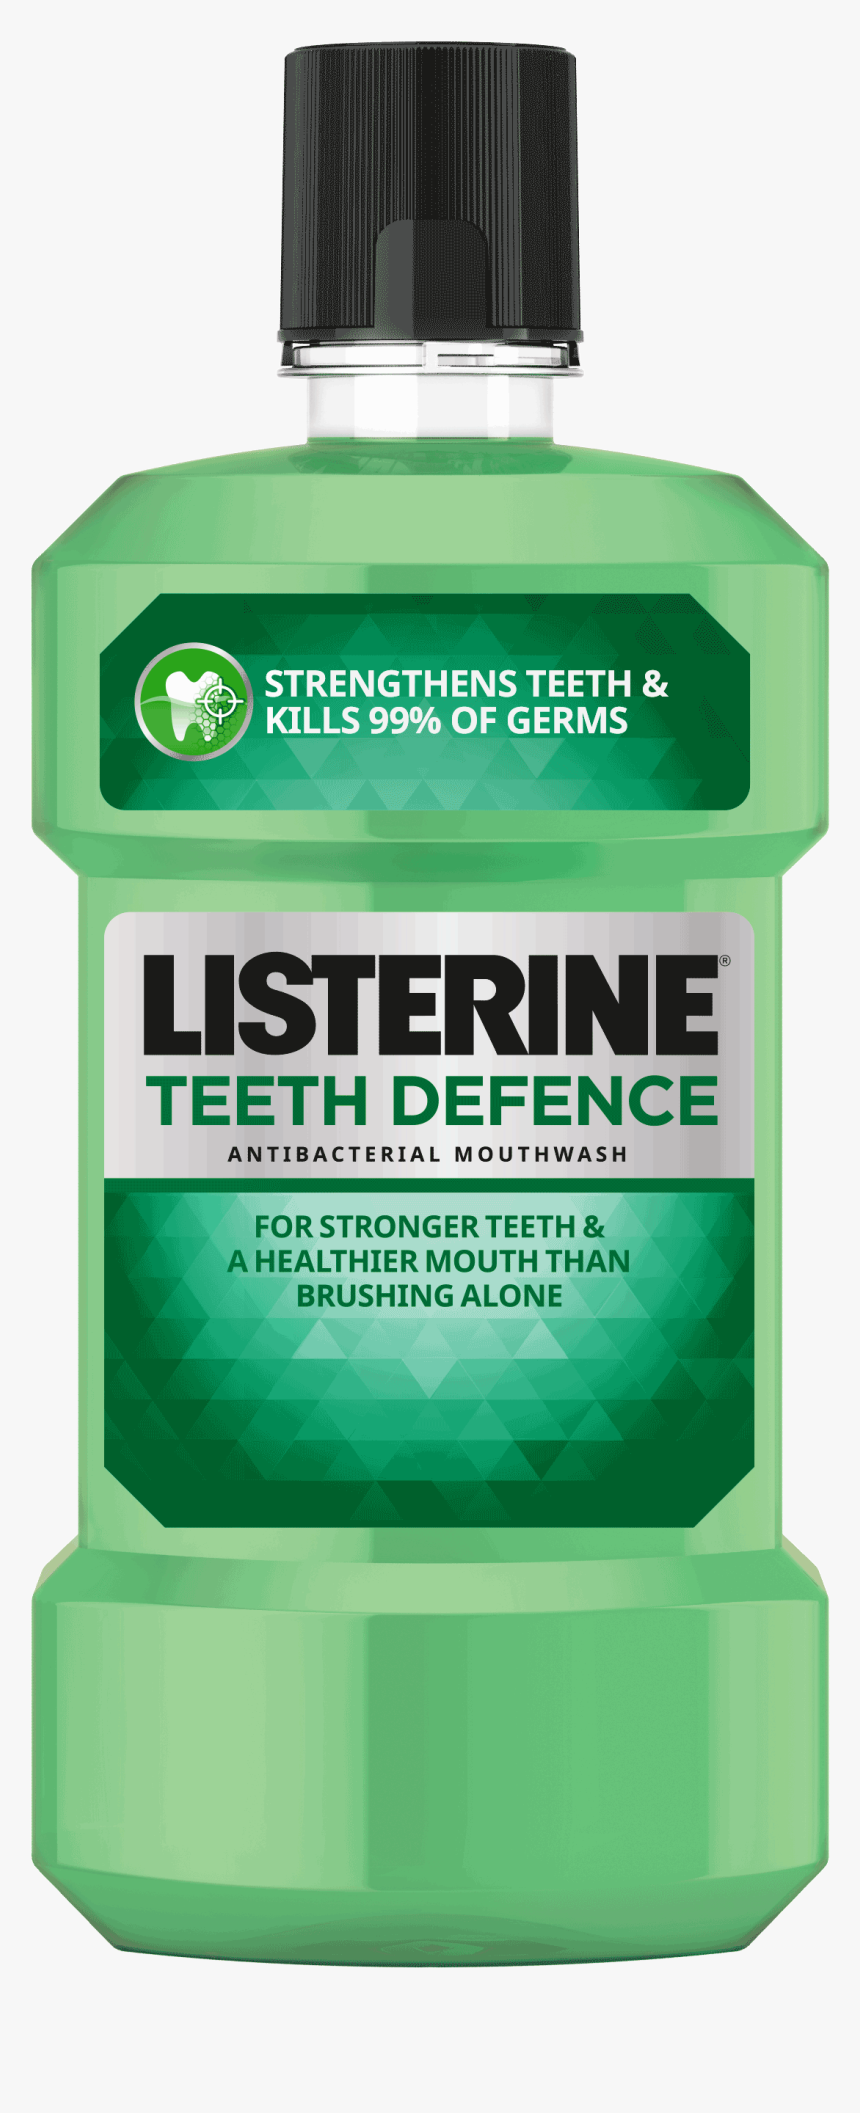 New Listerine Teethdefence Clean - Antiseptic Mouthwash, HD Png Download, Free Download